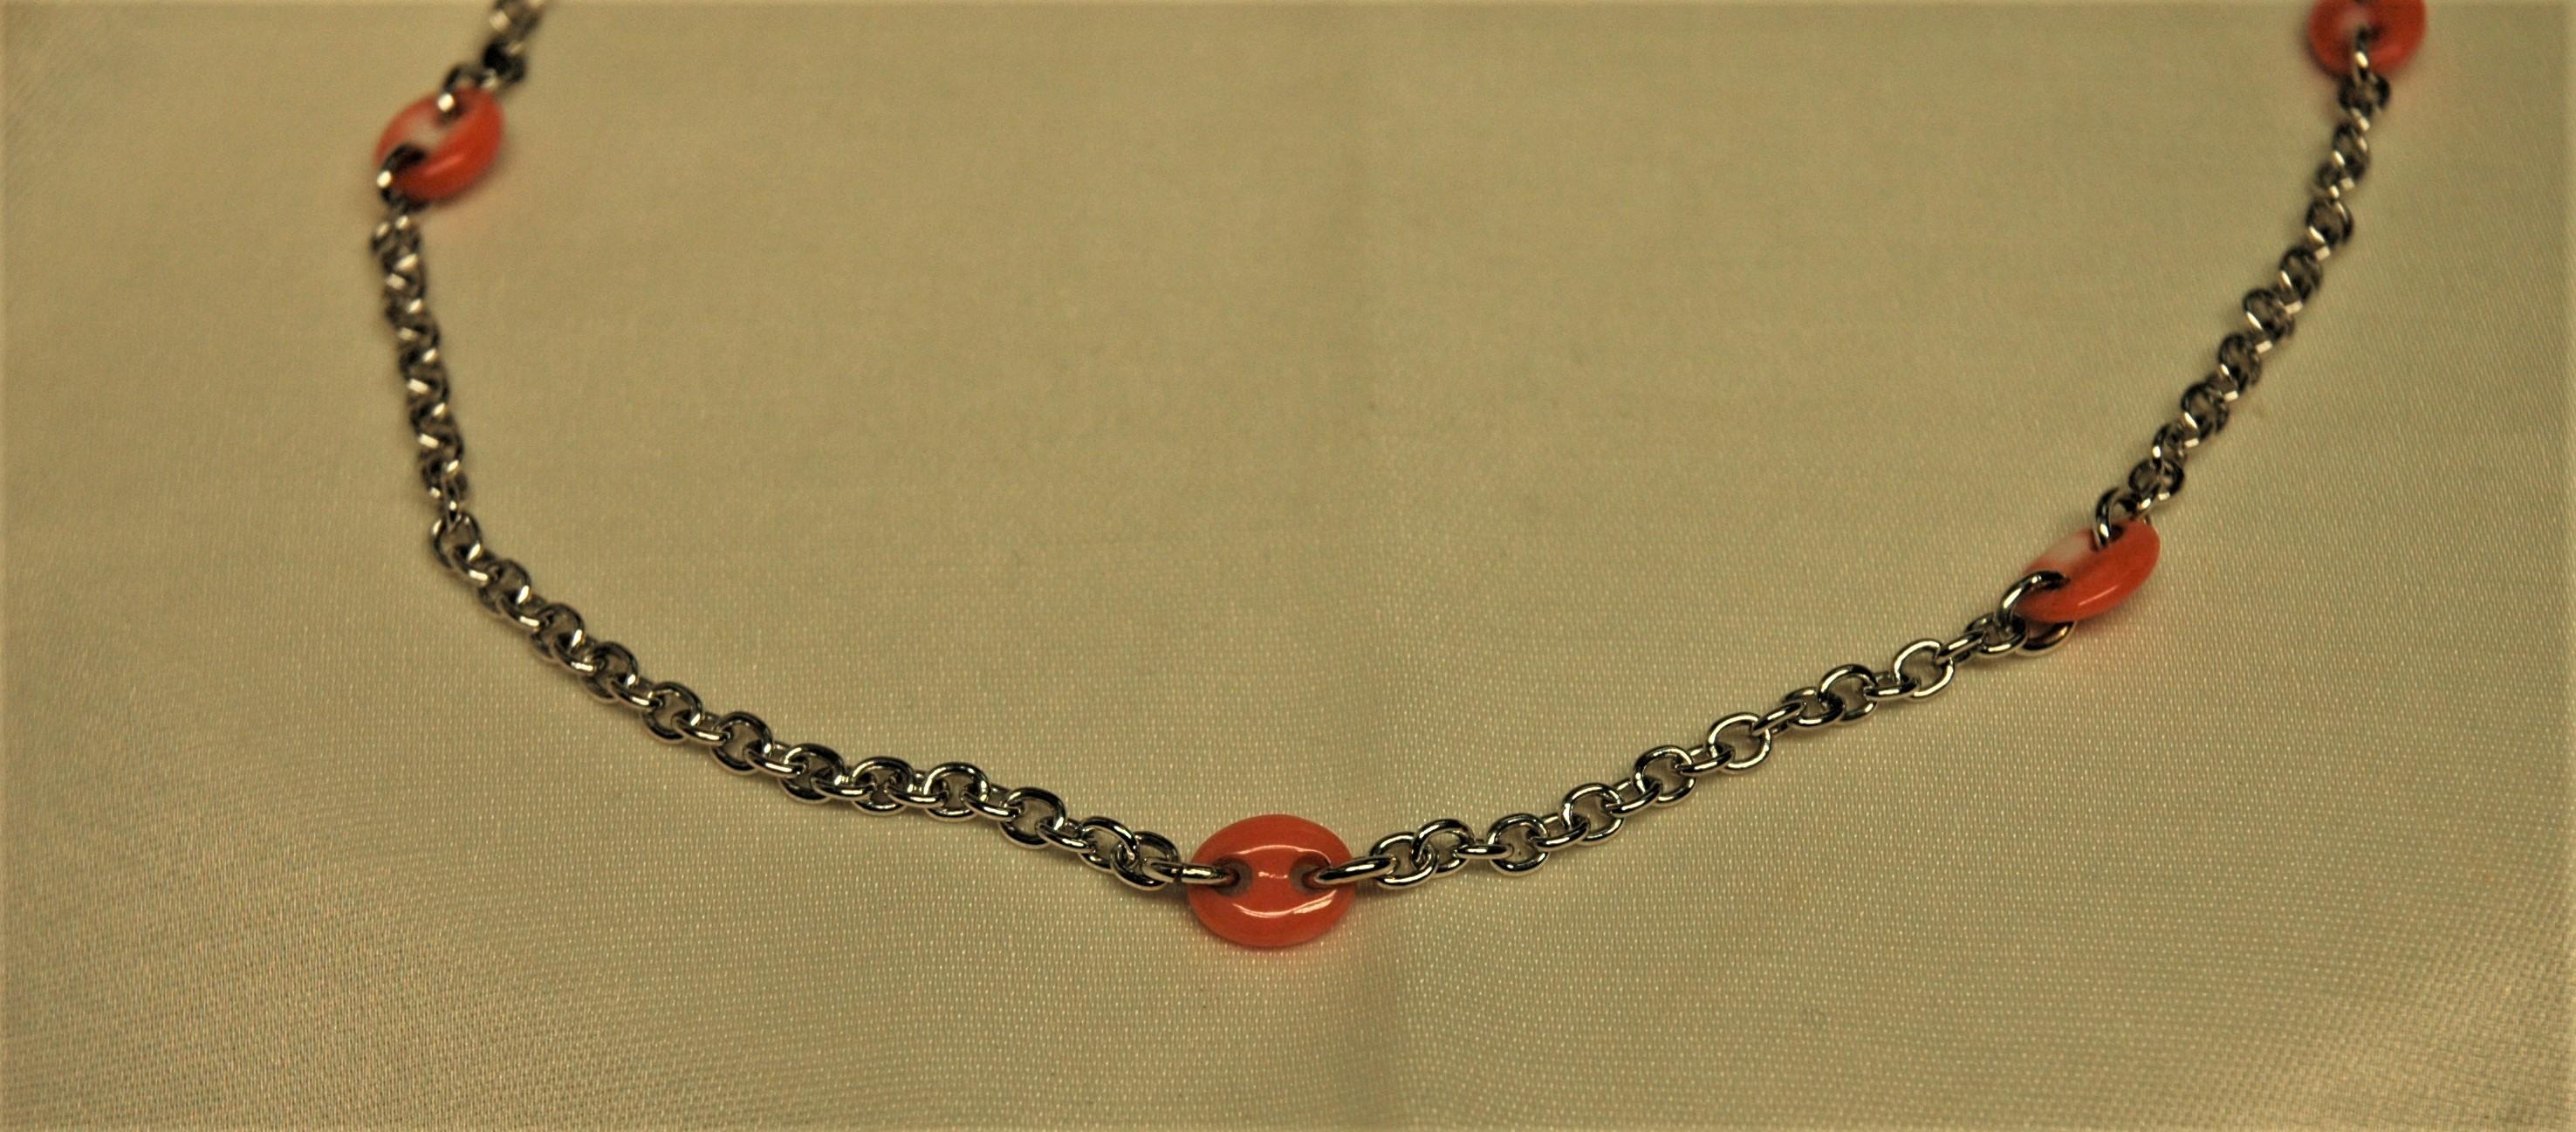 Special white gold chain necklace. It has six natural coral elements and it is 47 cm. long. The total weight is 18.4 g. It's Italian manufacturing made in the city of Torre del Greco, near Naples. This place is very famous for the manufacturing of